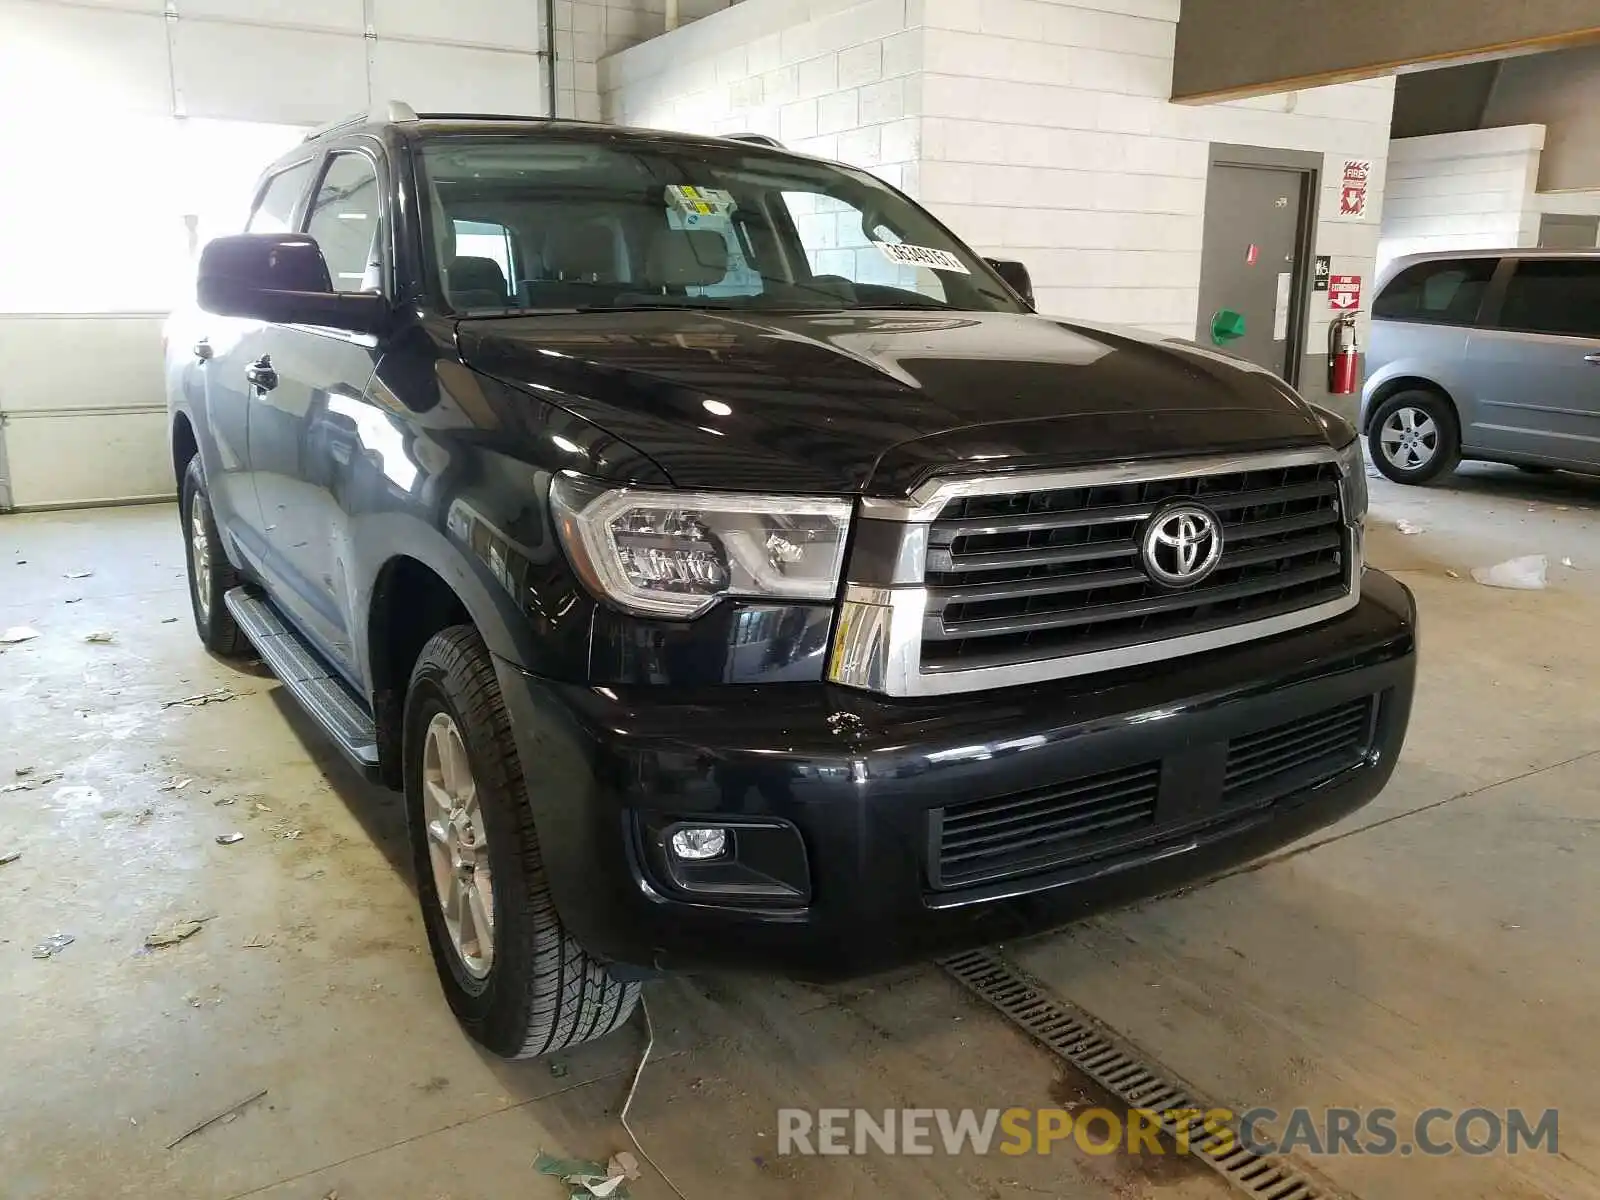 1 Photograph of a damaged car 5TDBY5G11KS170381 TOYOTA SEQUOIA 2019